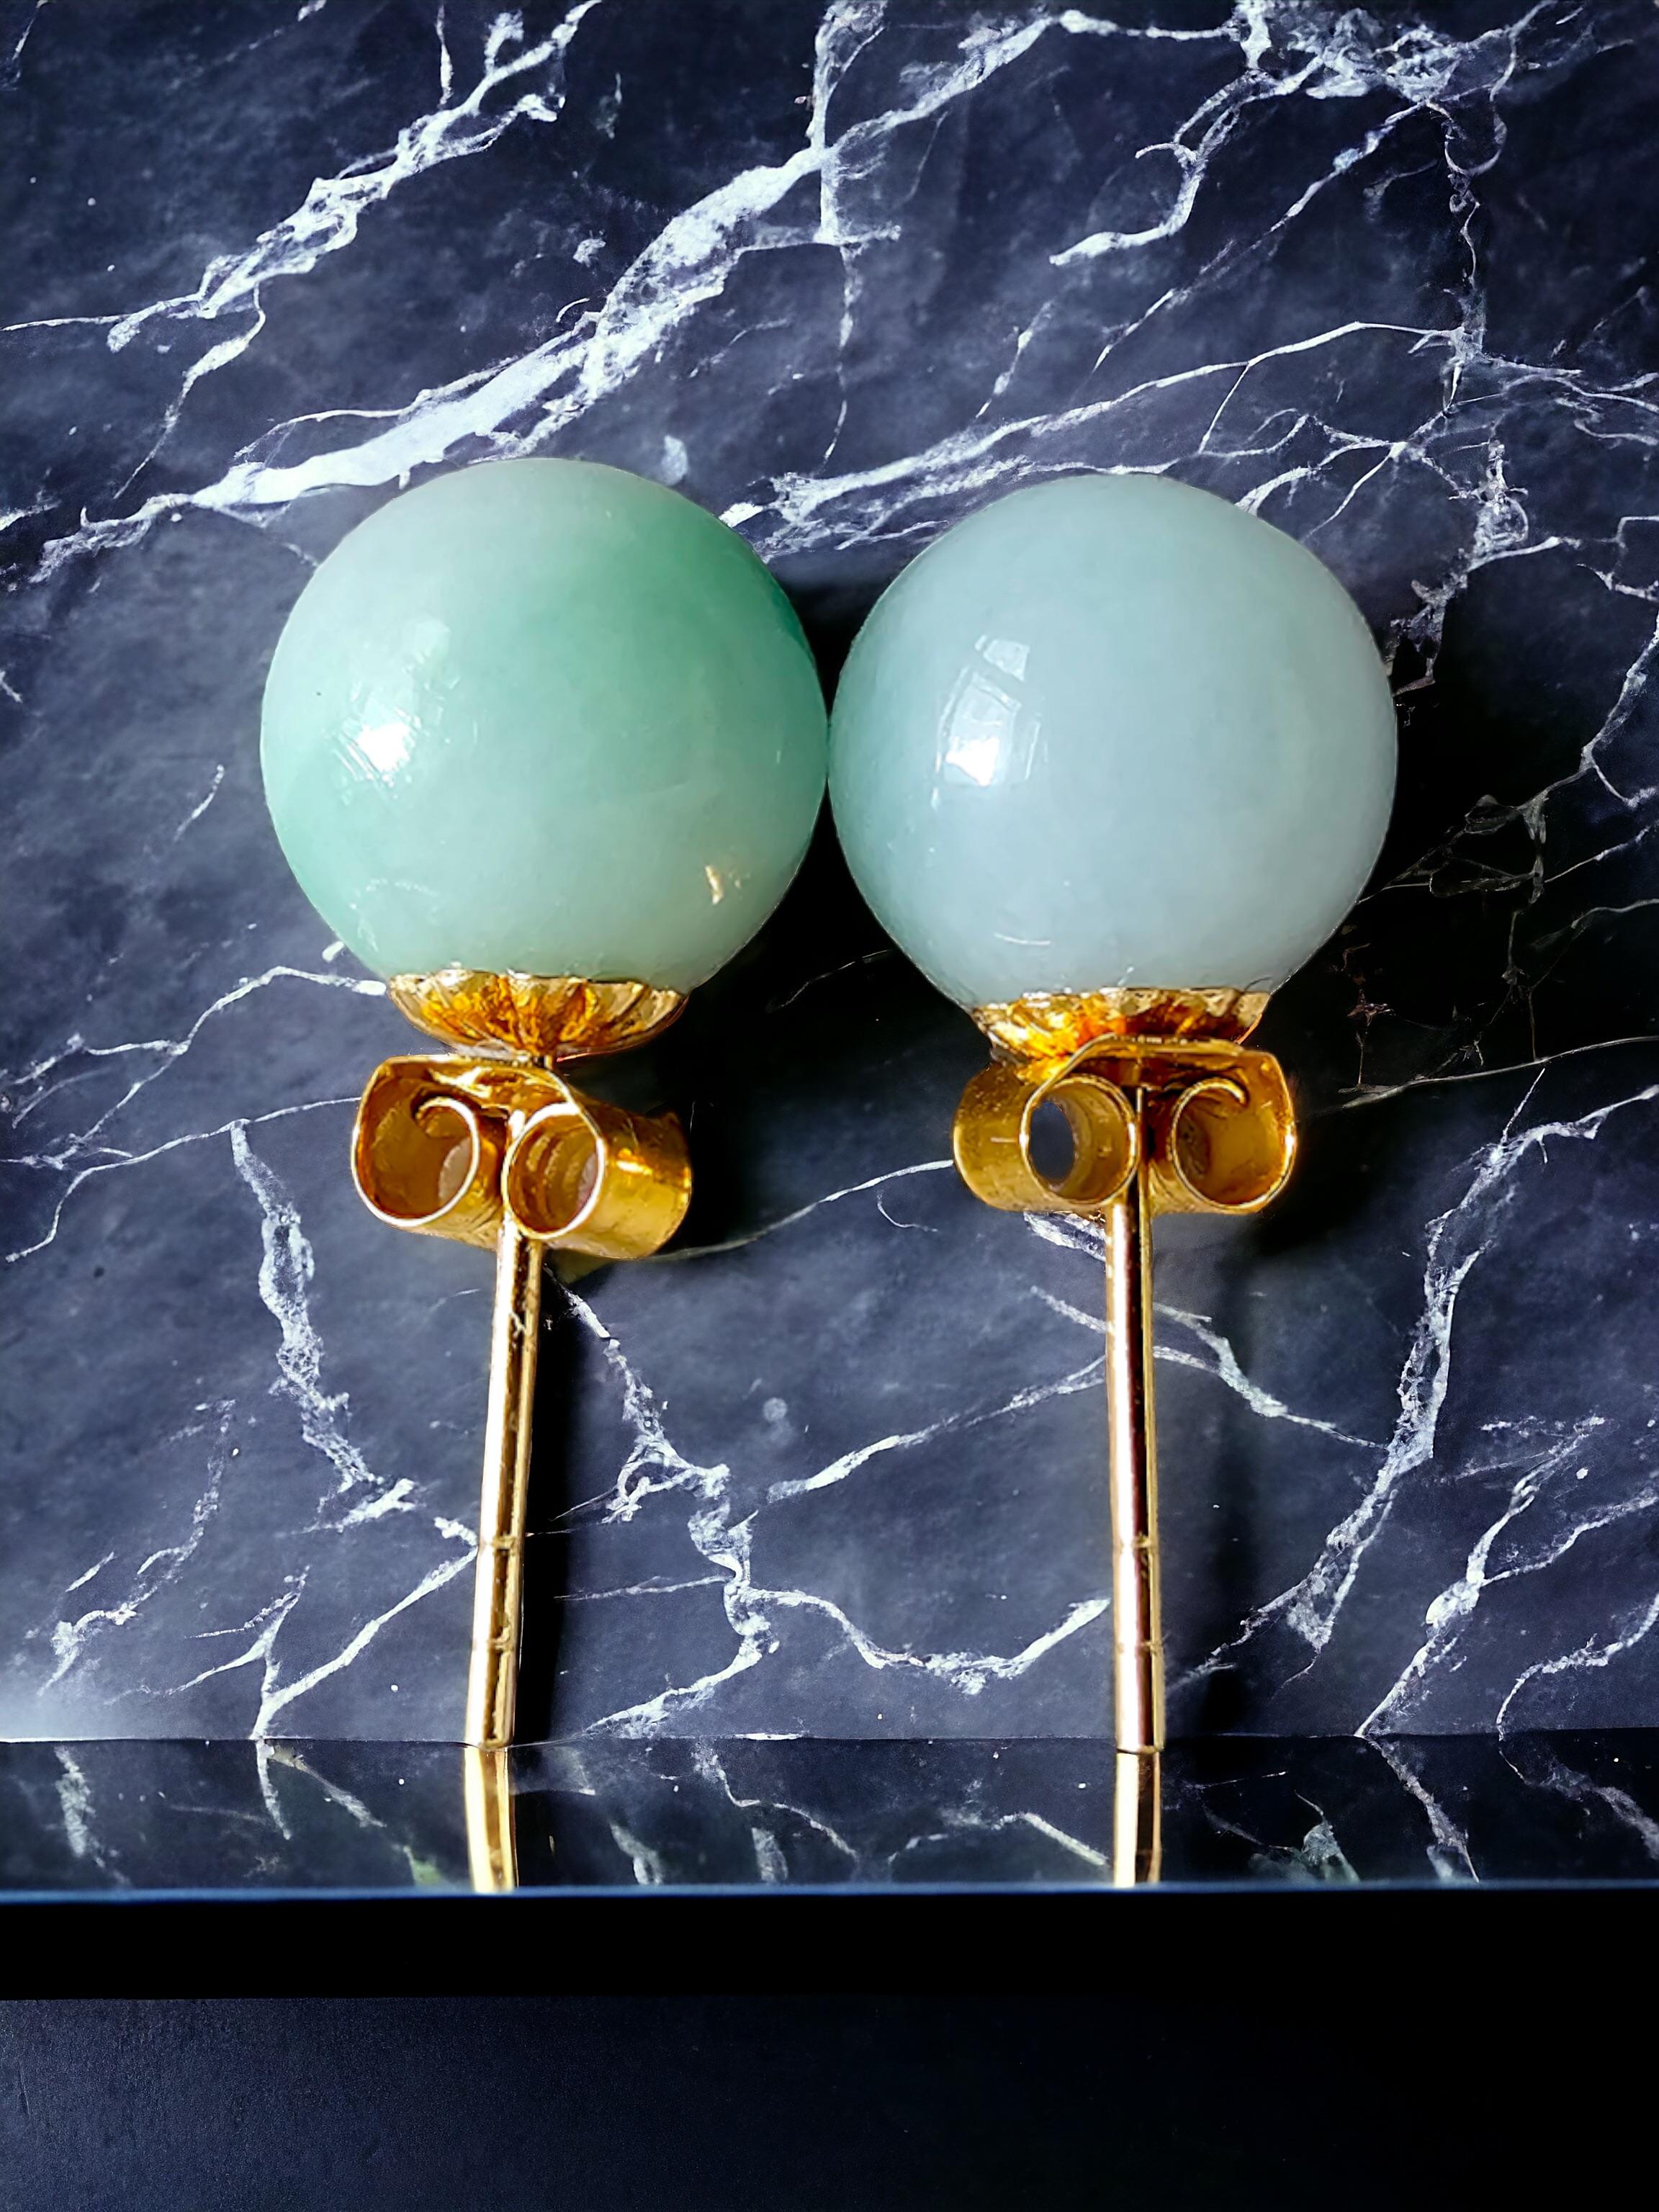 Ball Cut Beads of Eternity Burmese A-Jade Stud Earrings with 18K Yellow Gold 8mm 18001 For Sale